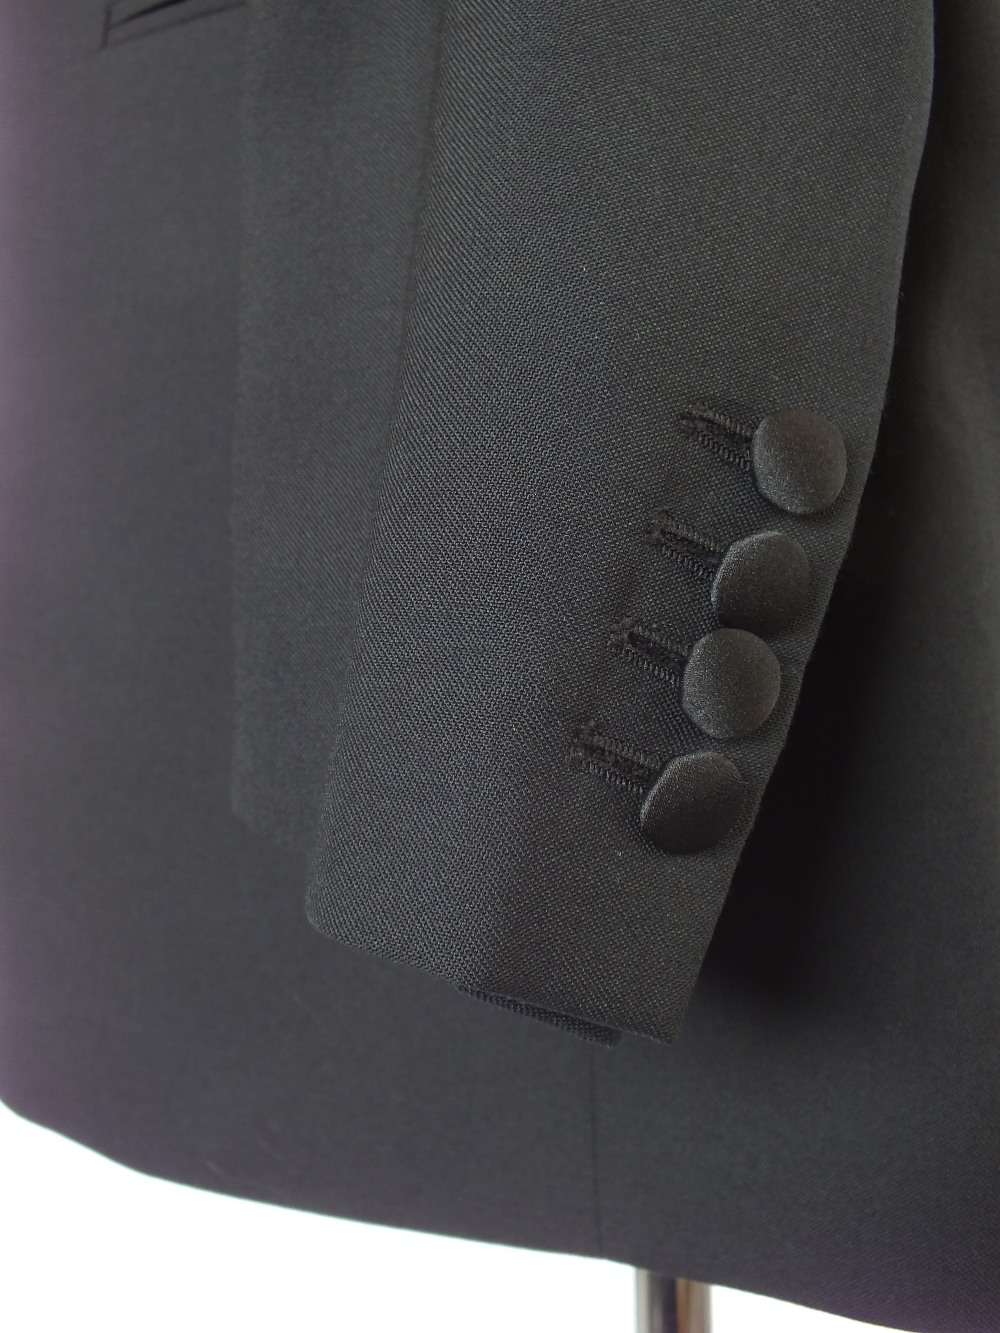 A Charles Tyrwhitt dinner suit, satin twill lower lapel, satin twill detailing, flat front to - Image 5 of 6